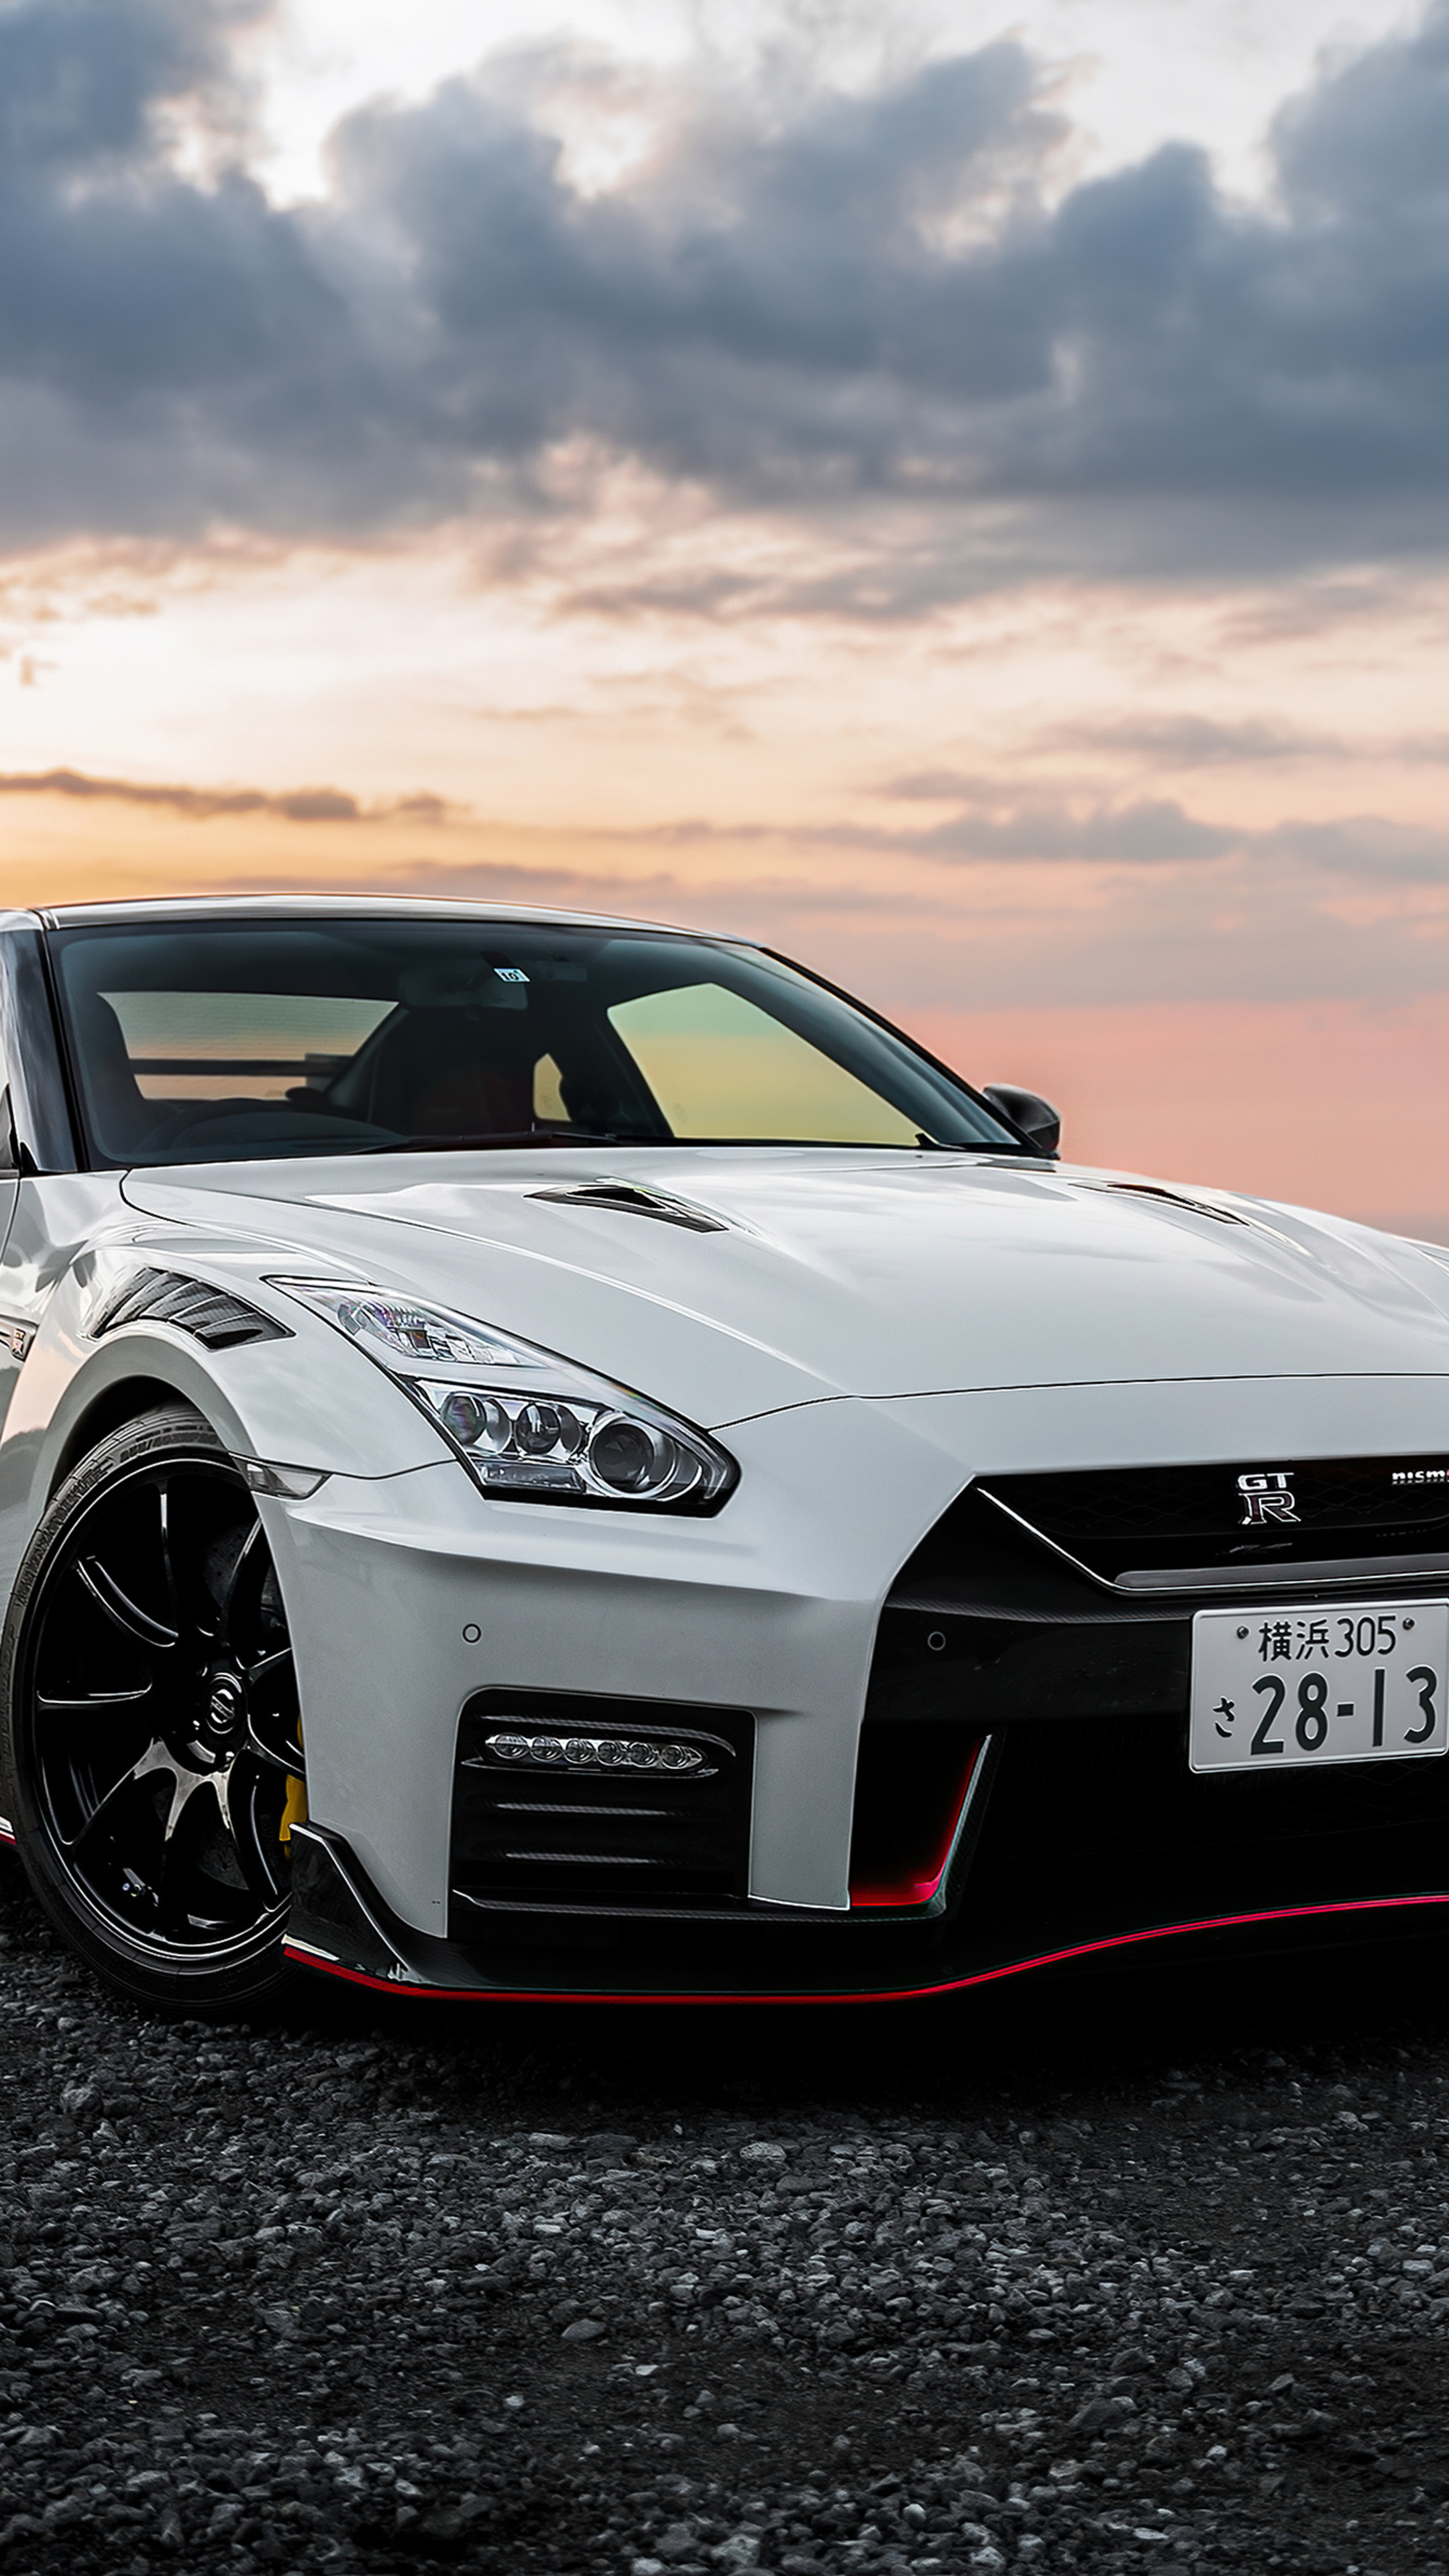 Nissan GT-R, NISMO edition, Sony Xperia exclusive, Thrilling sports car, 2160x3840 4K Handy